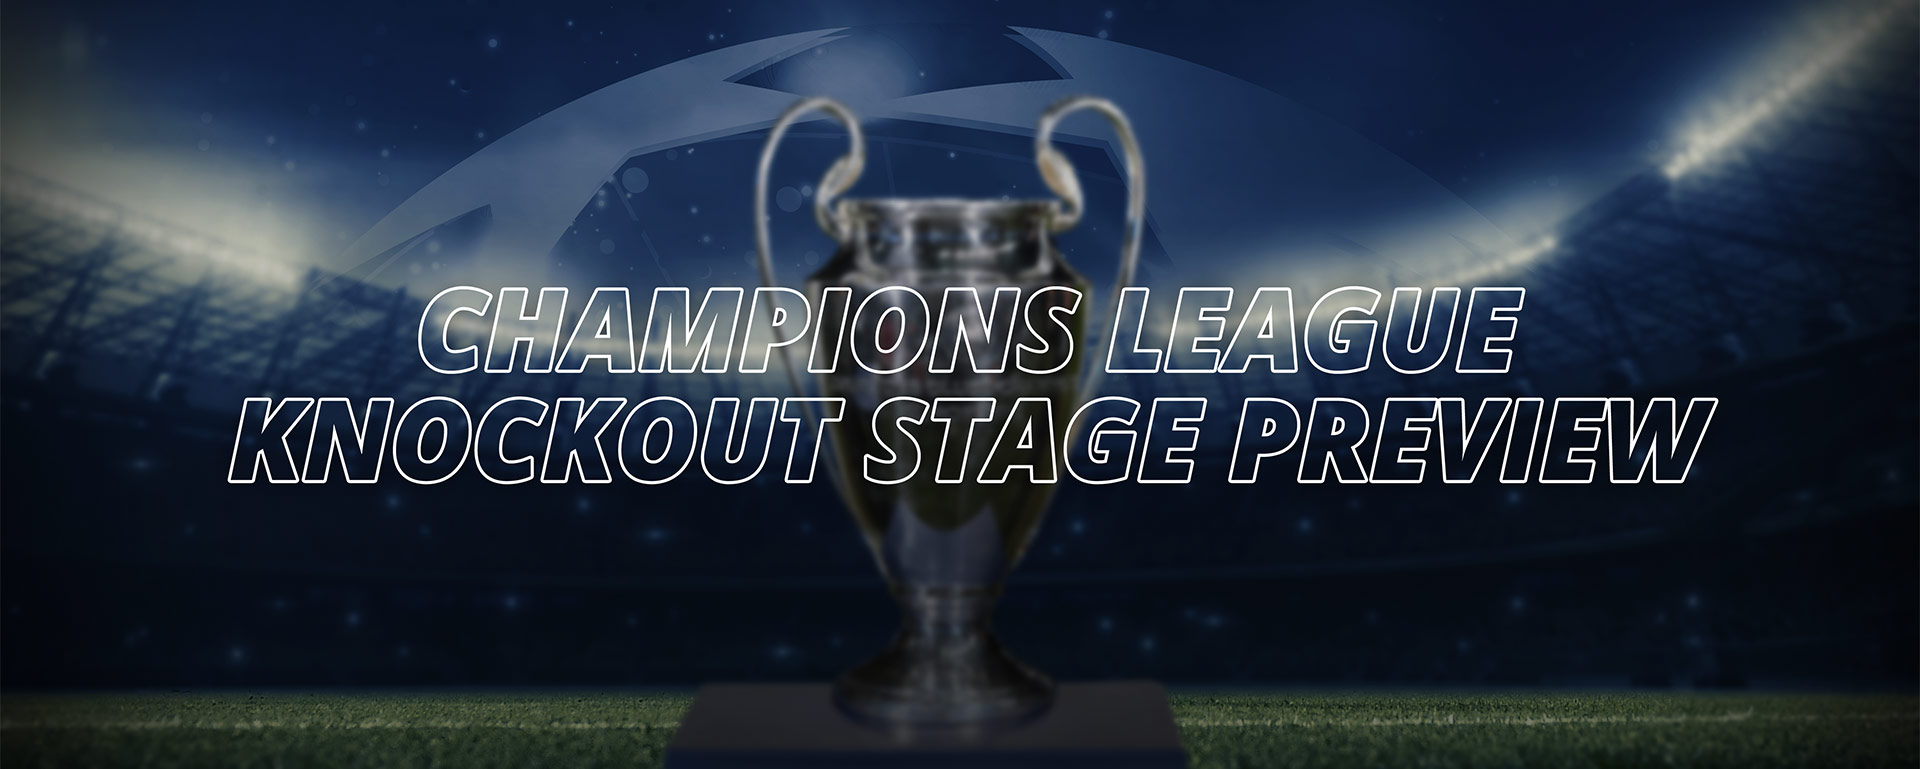 CHAMPIONS LEAGUE KNOCKOUT STAGE PREVIEW